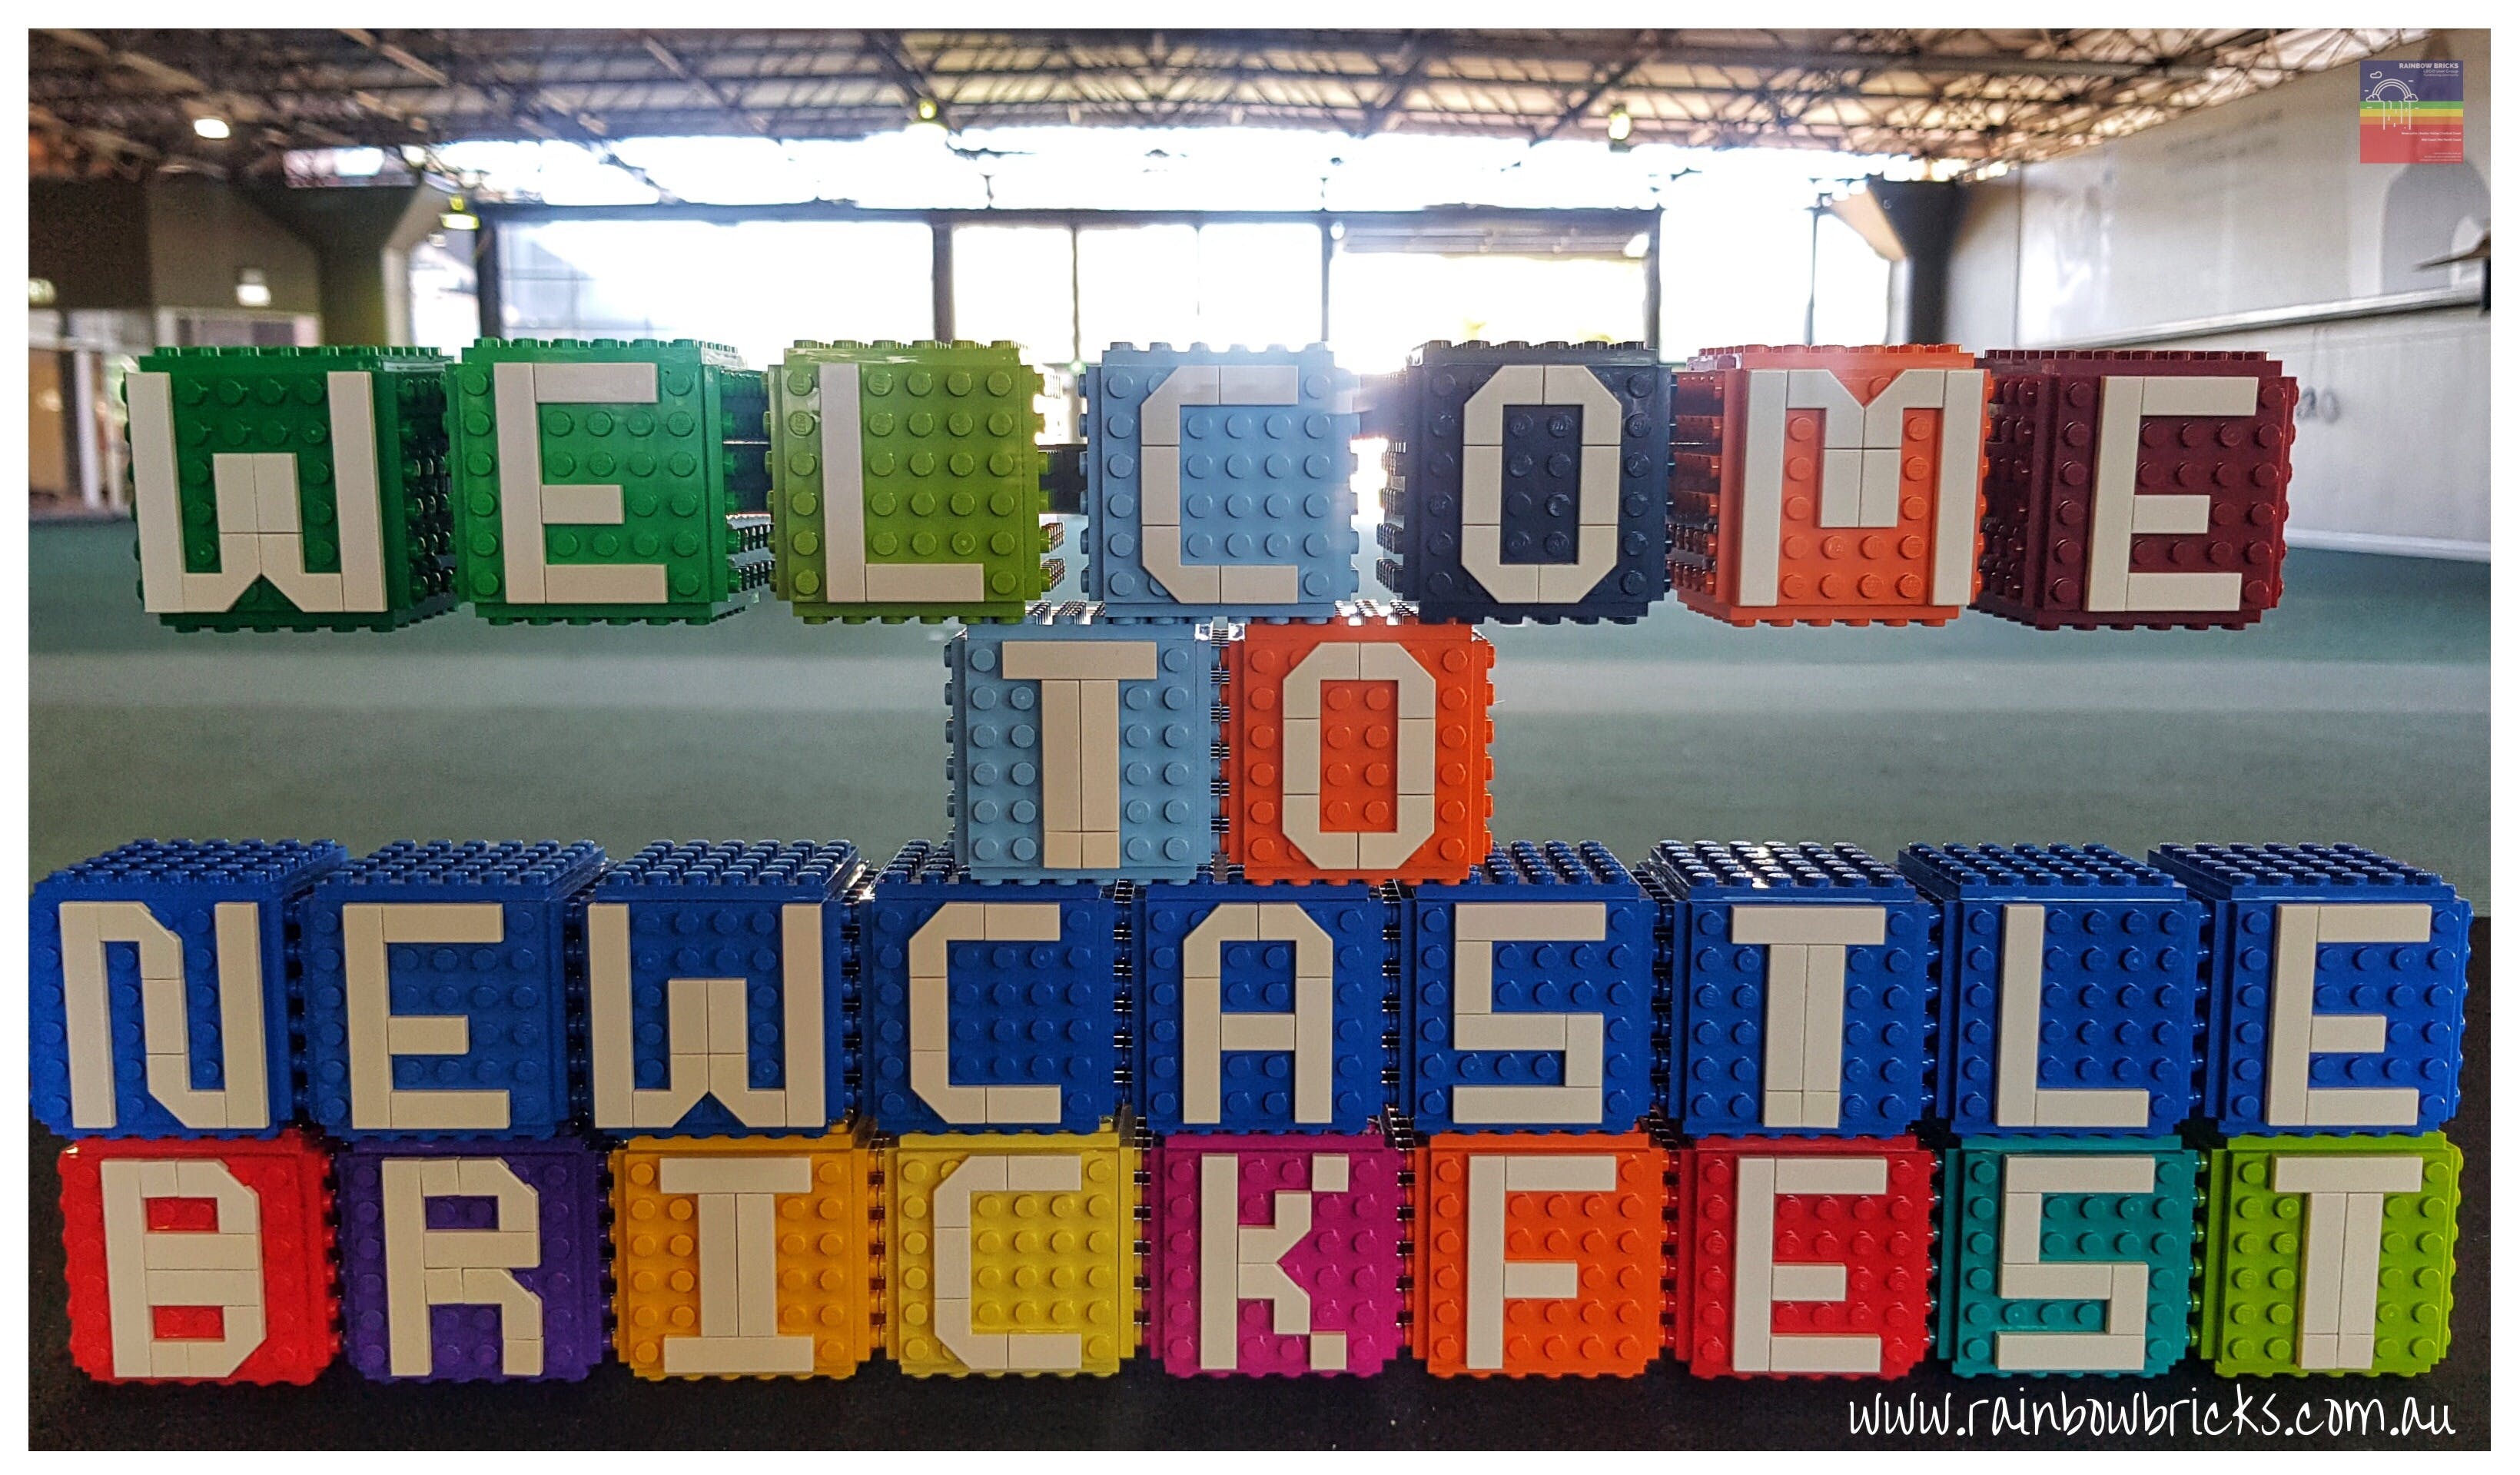 Newcastle Brickfest at Home A Virtual Lego Fan Event - Tweed Heads Accommodation